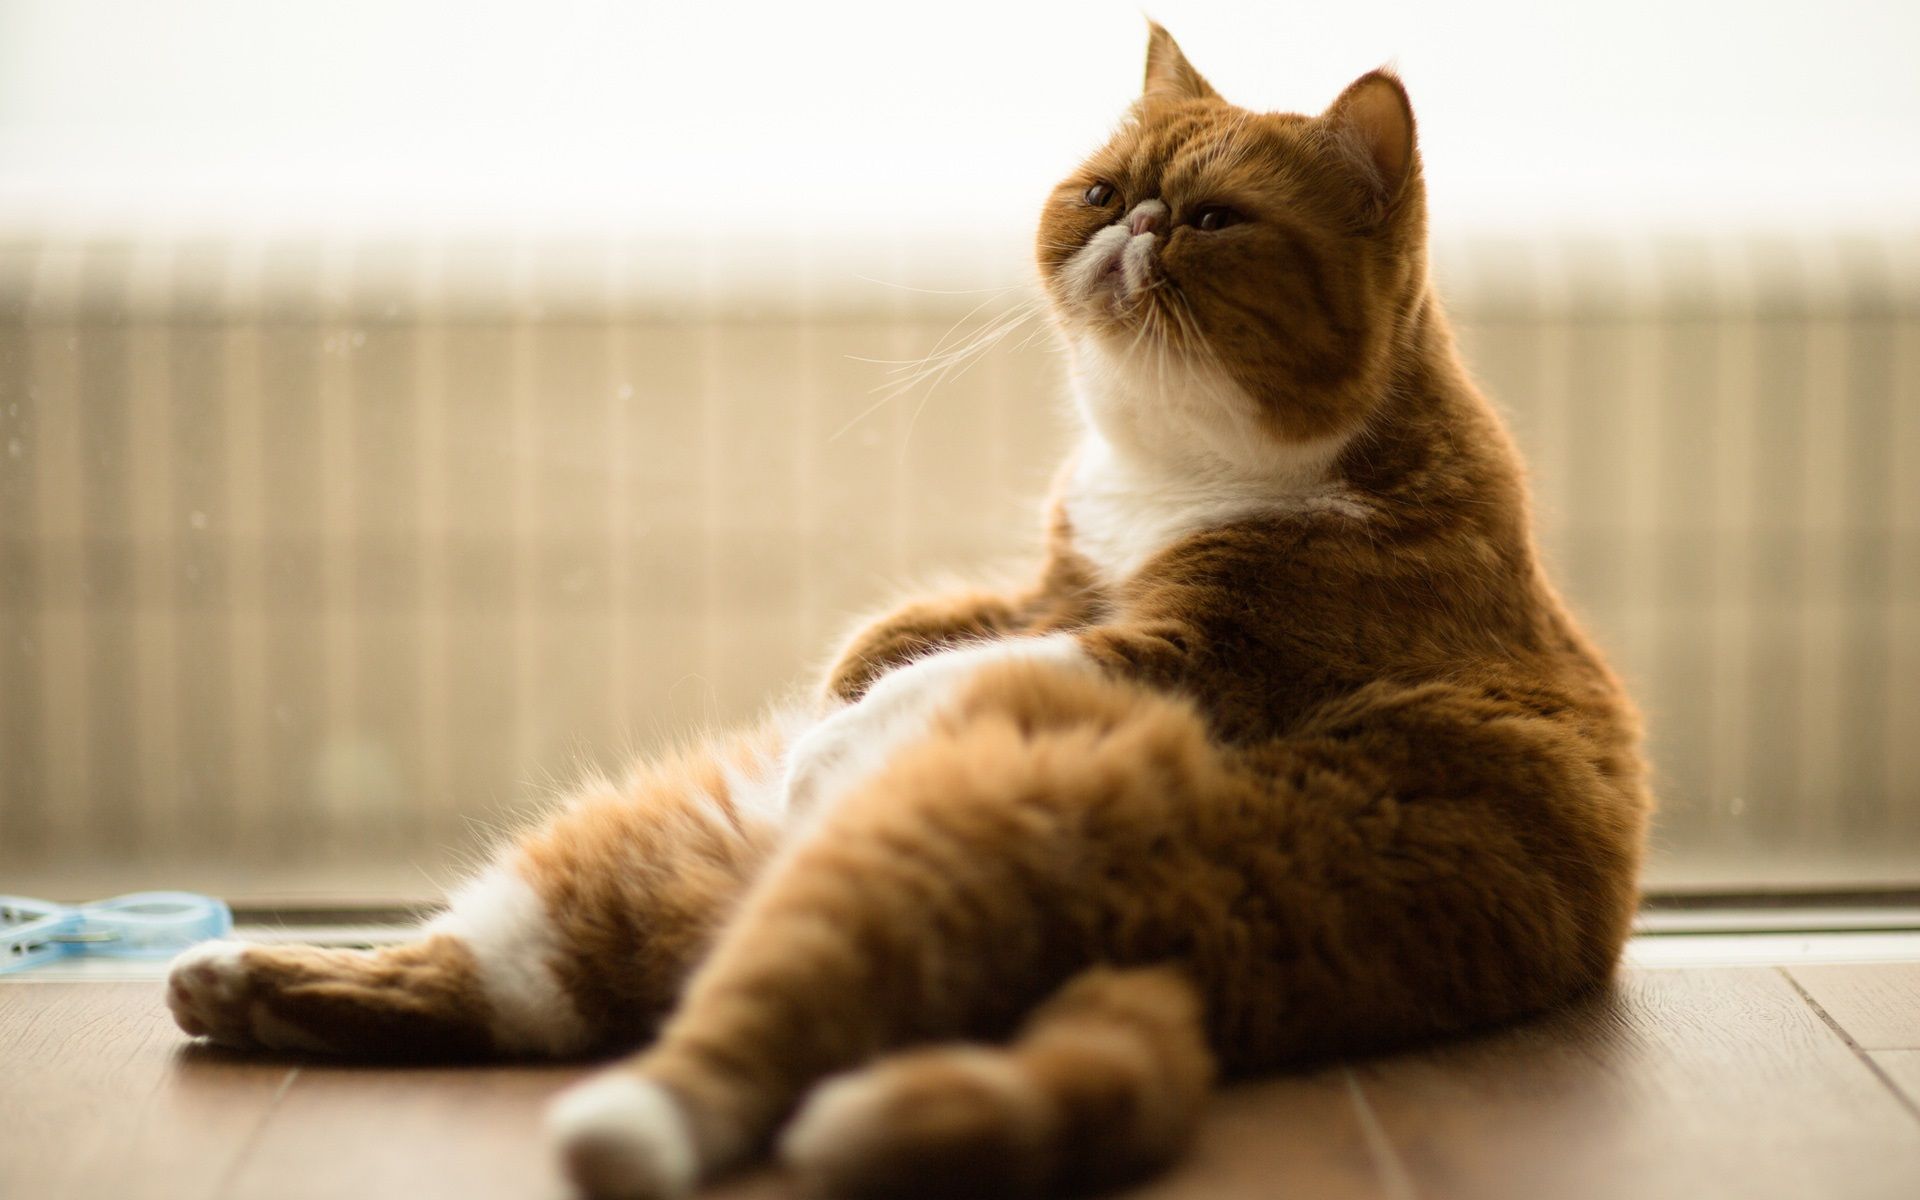 1920x1200 Wallpaper Fat cat relaxation 1920x1200 HD Picture, Image.